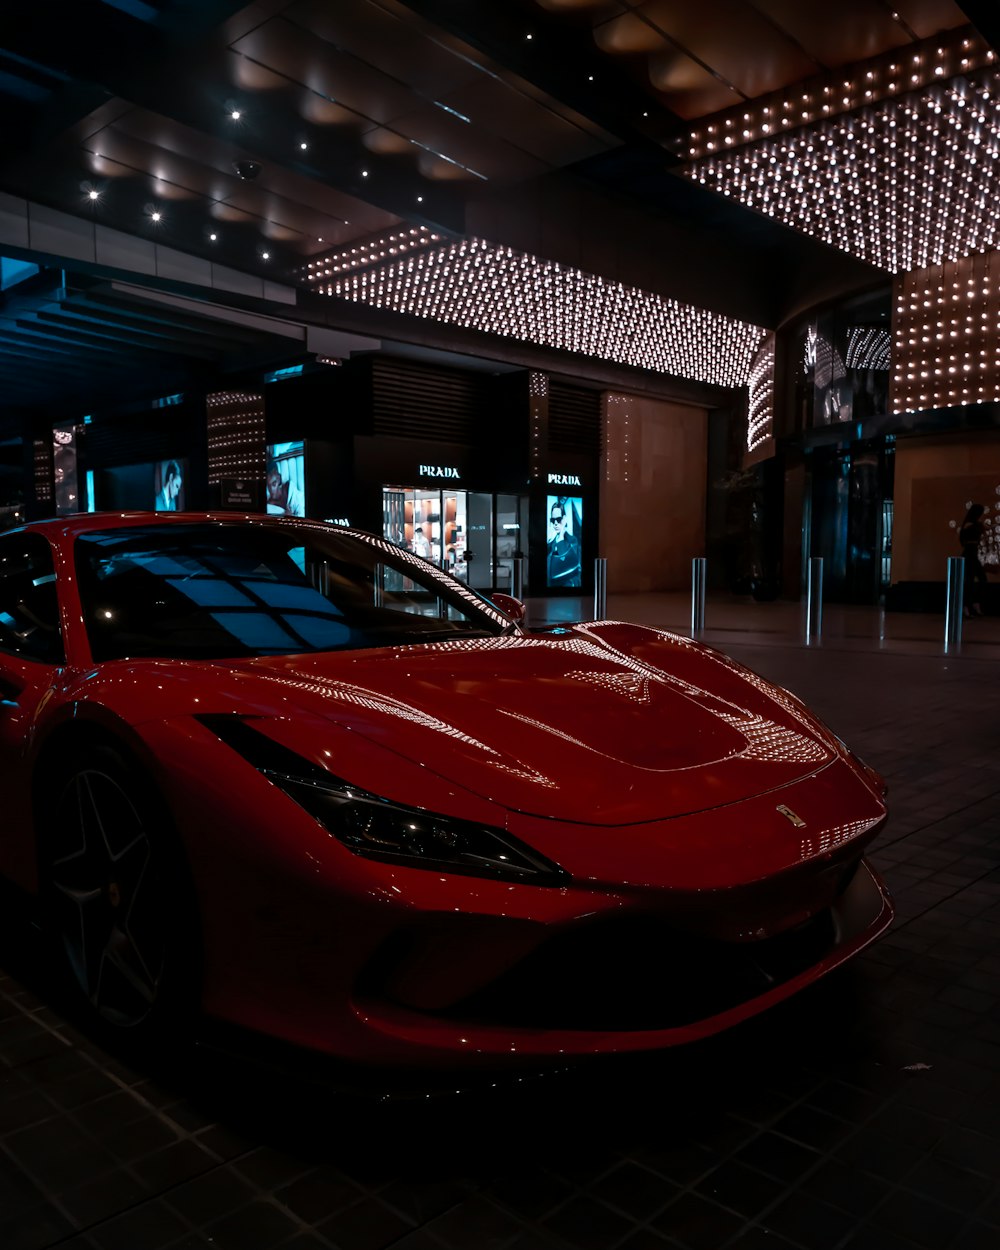 Red ferrari 458 italia parked in front of store photo – Free Brown Image on  Unsplash